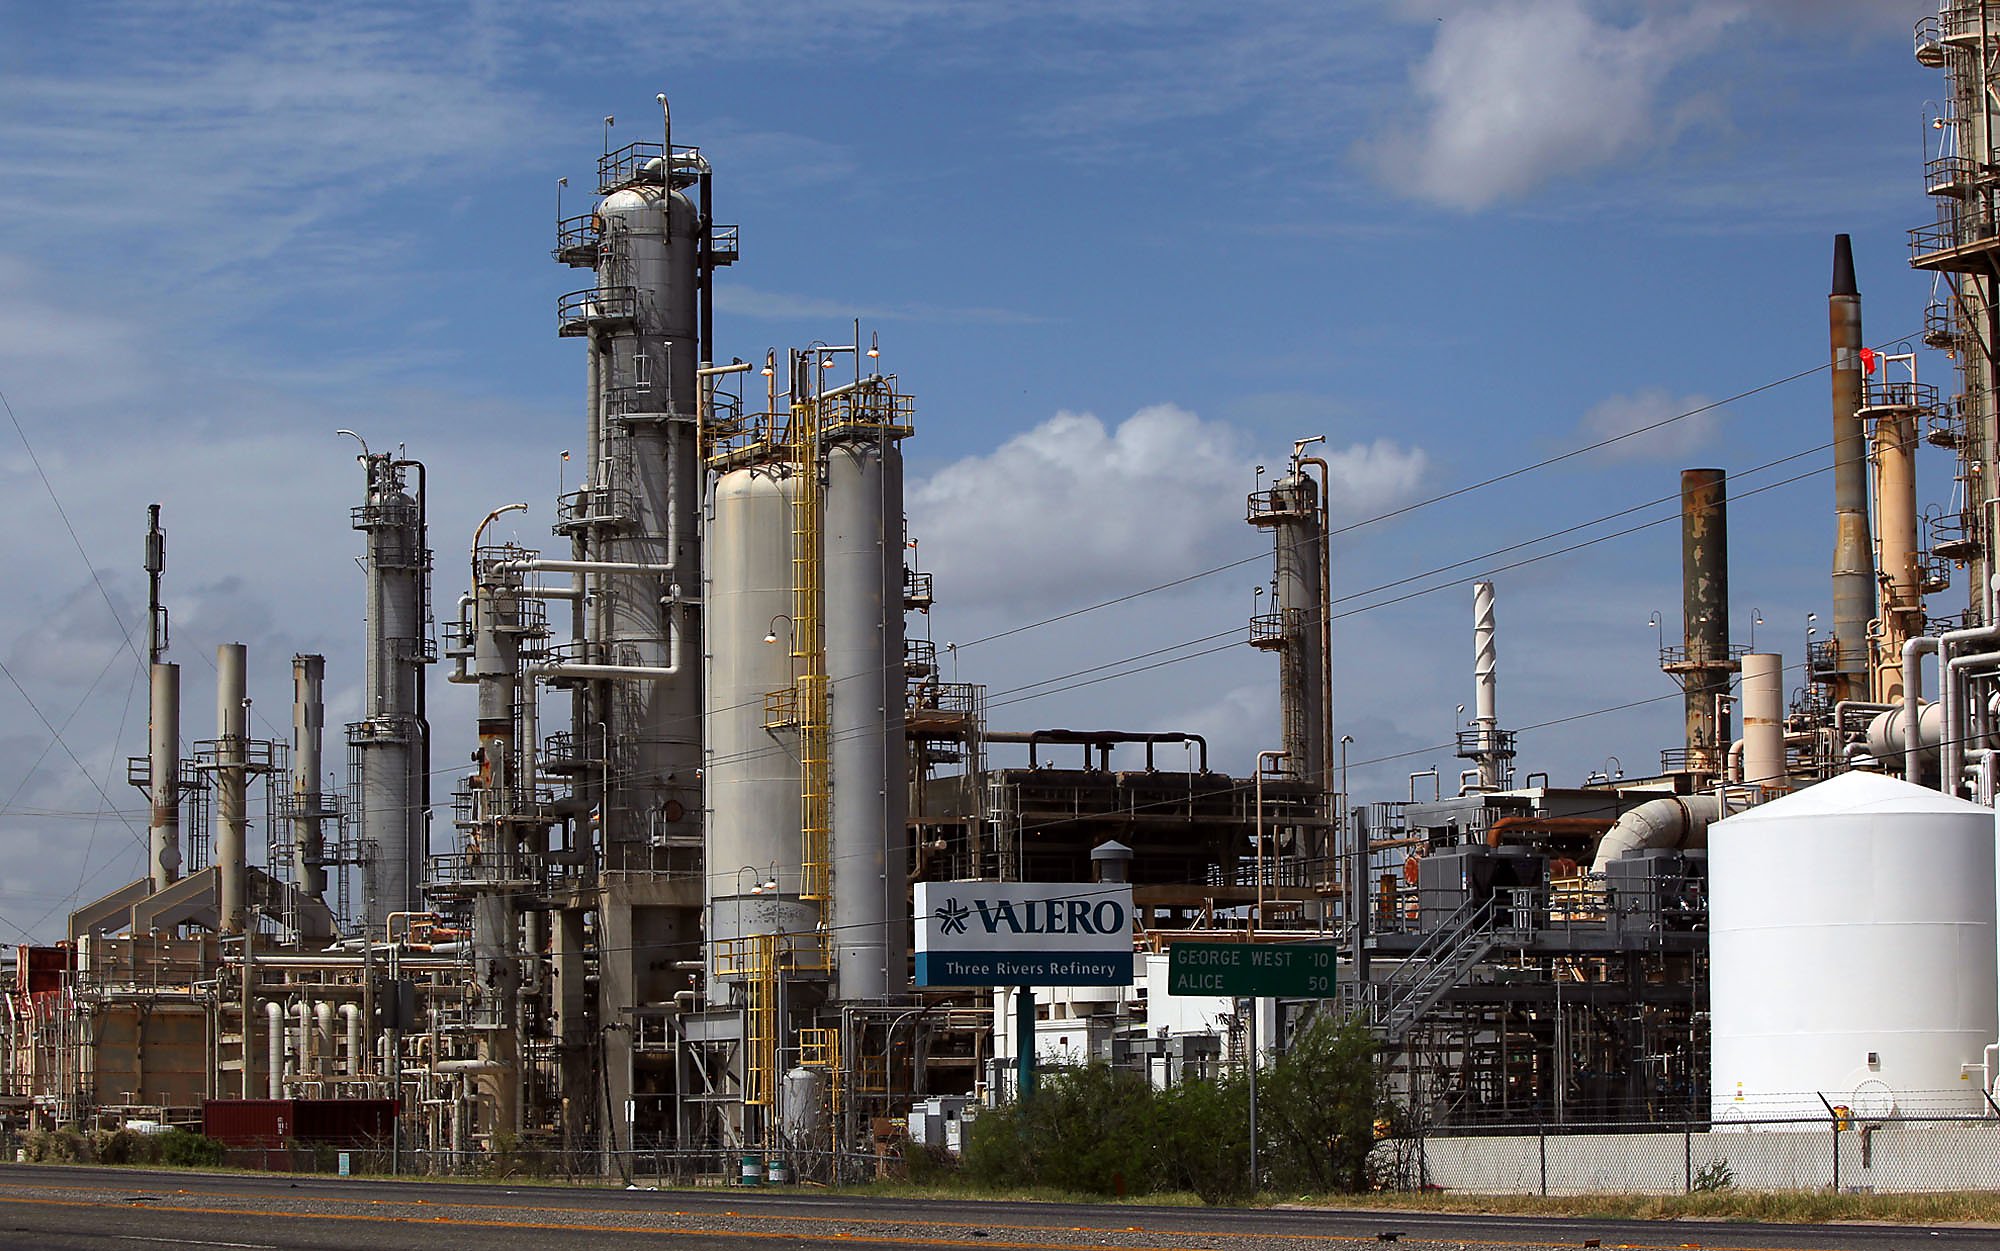 Some of America's refineries may be on the brink of shutting